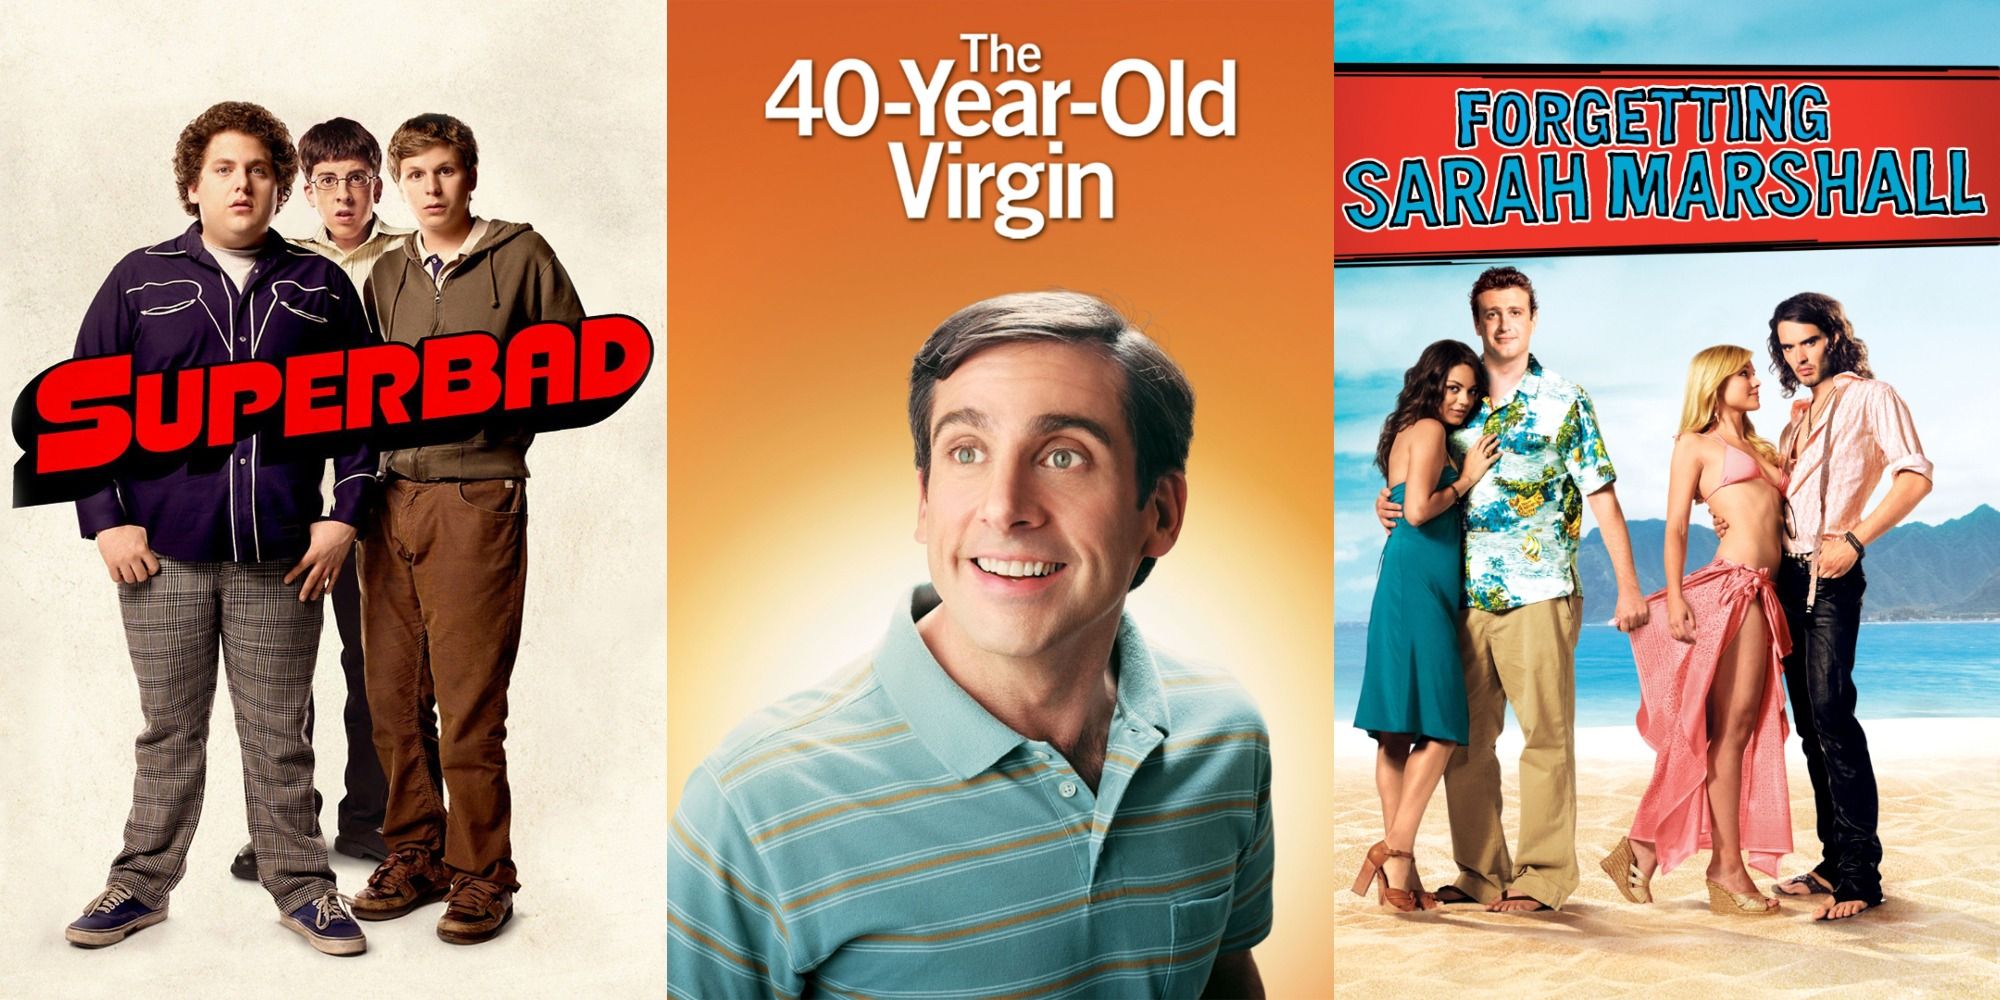 Combined posters of Superbad, The 40-Year-Old Virgin, Forgetting Sarah Marshall featuring lead stars